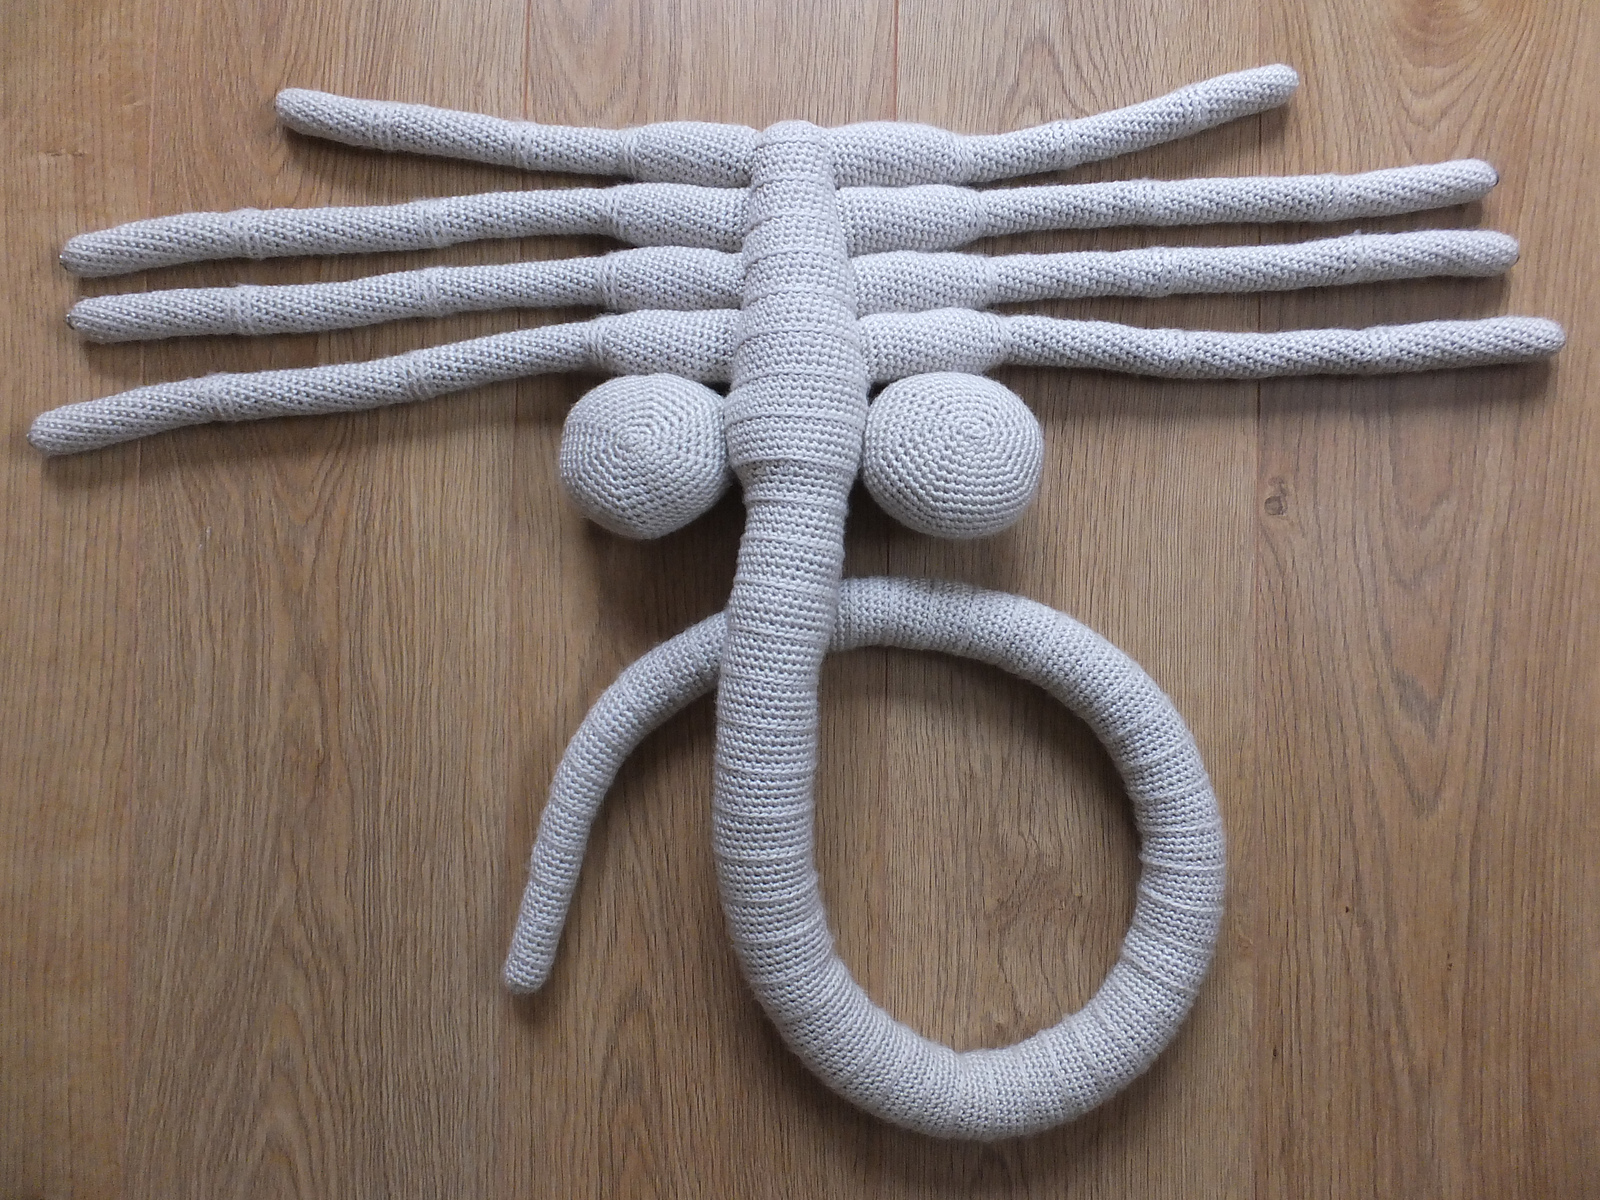 Crochet a Facehugger, Gives Free Hugs! Pattern Is FREE!